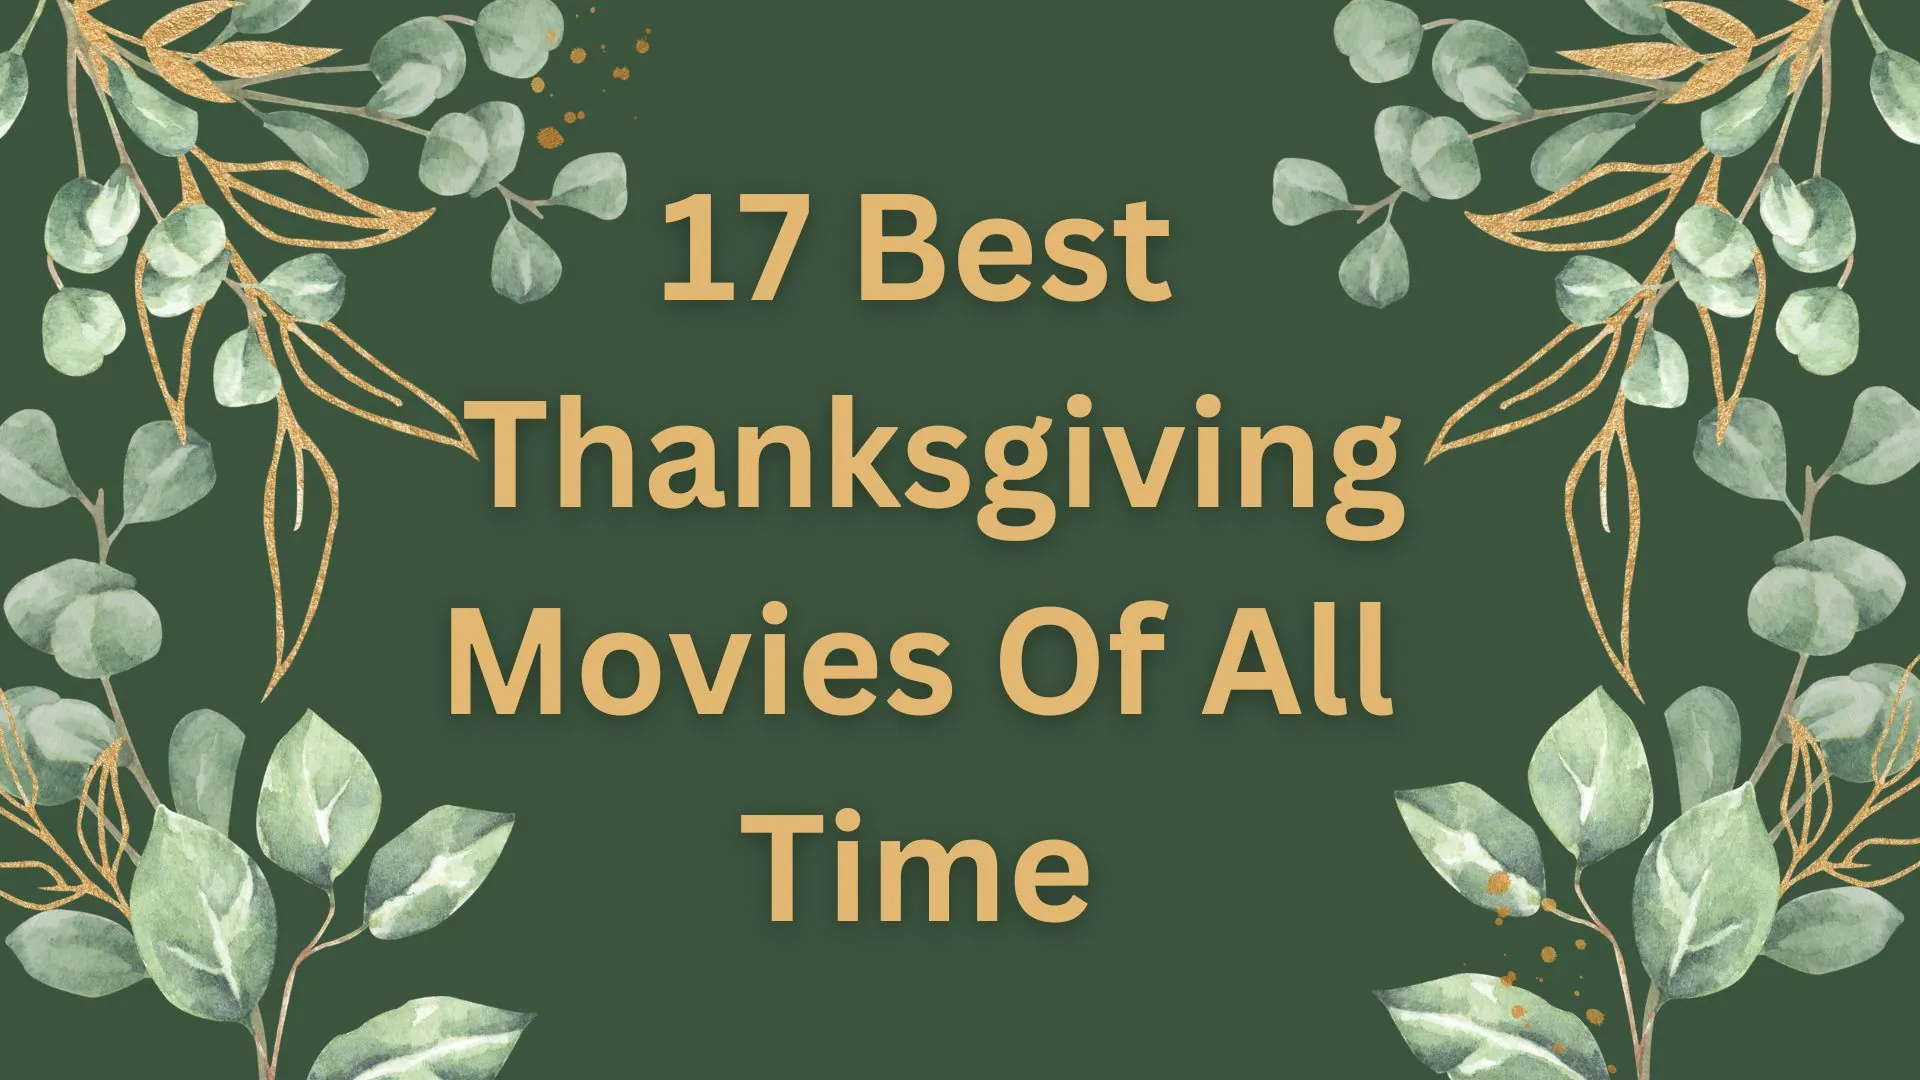 17 Best Thanksgiving Movies Of All Time